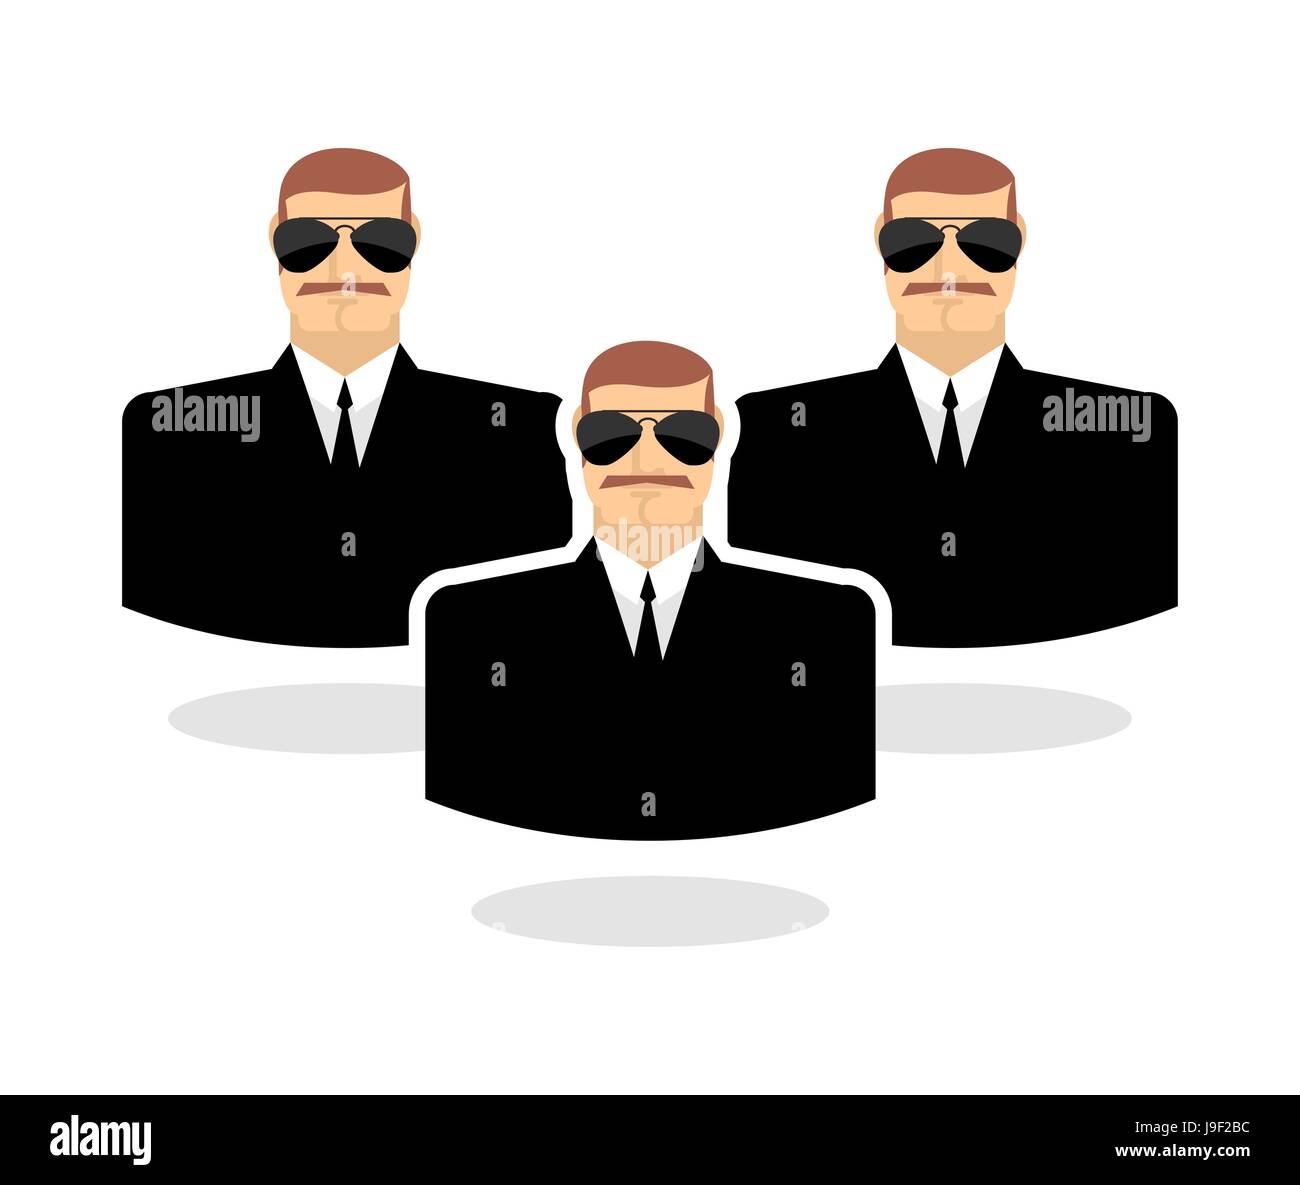 Security man Icon. guard. Bodyguards. Man in sunglasses and black suit Stock Vector